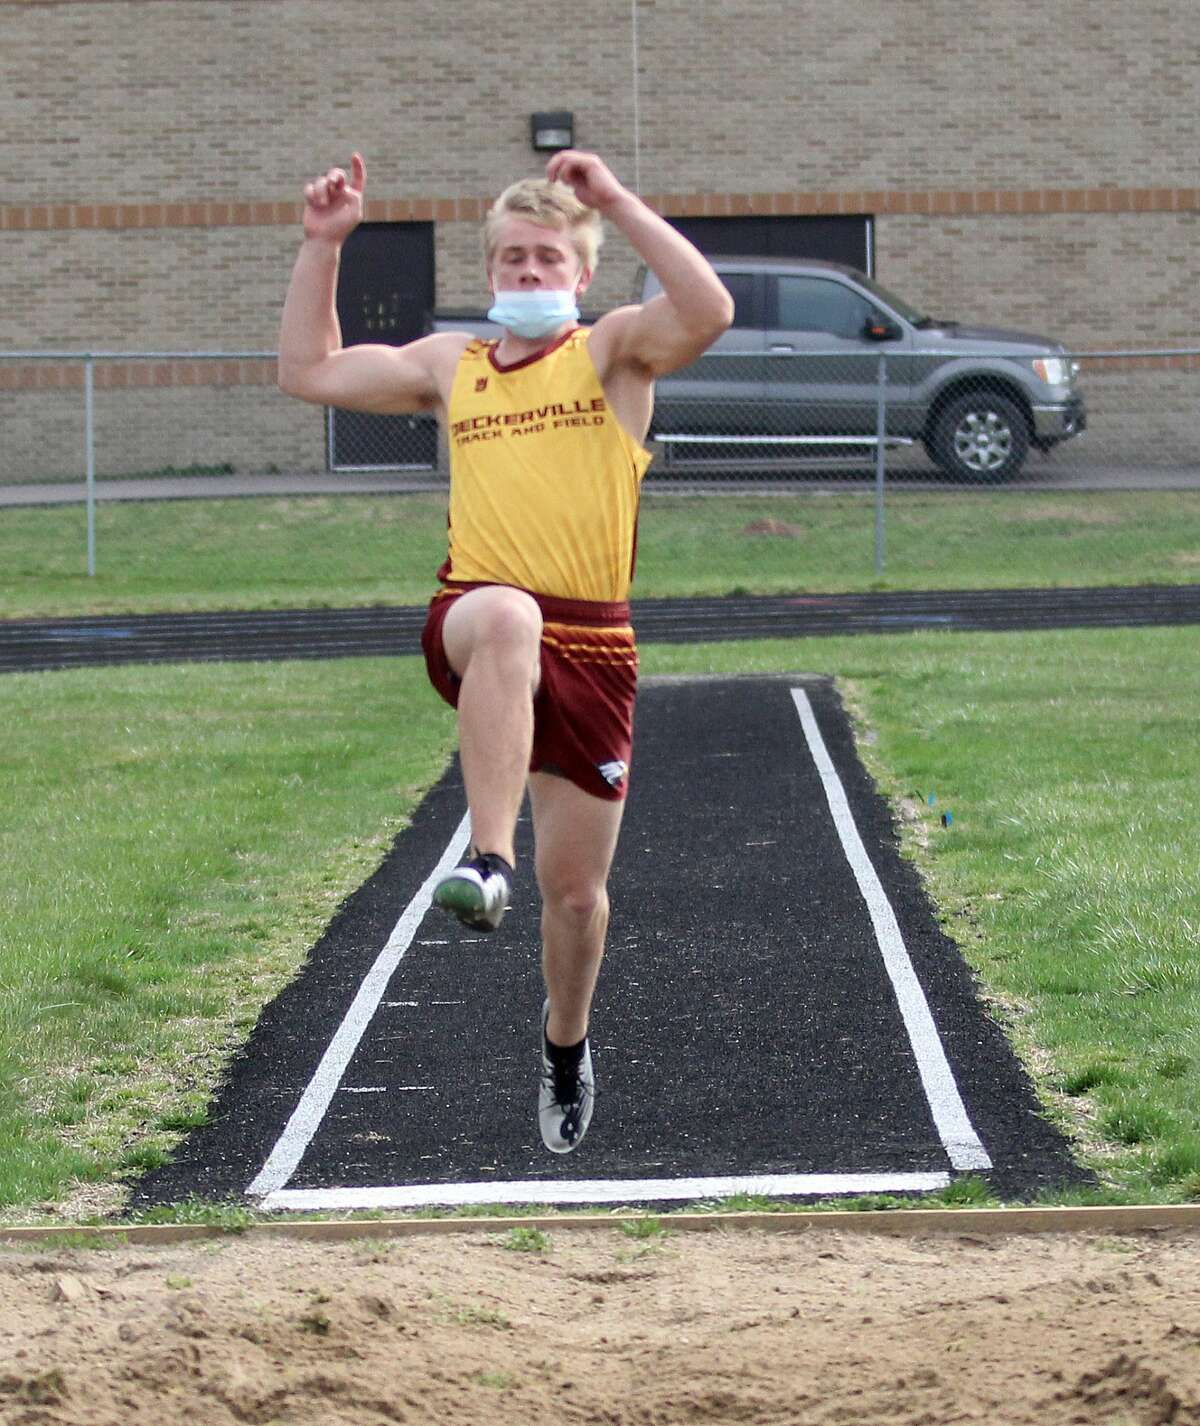 The Deckerville, Peck, Carsonville-Port Sanilac and North Huron track and field teams competed at a five-team event in Kinde on April 9.